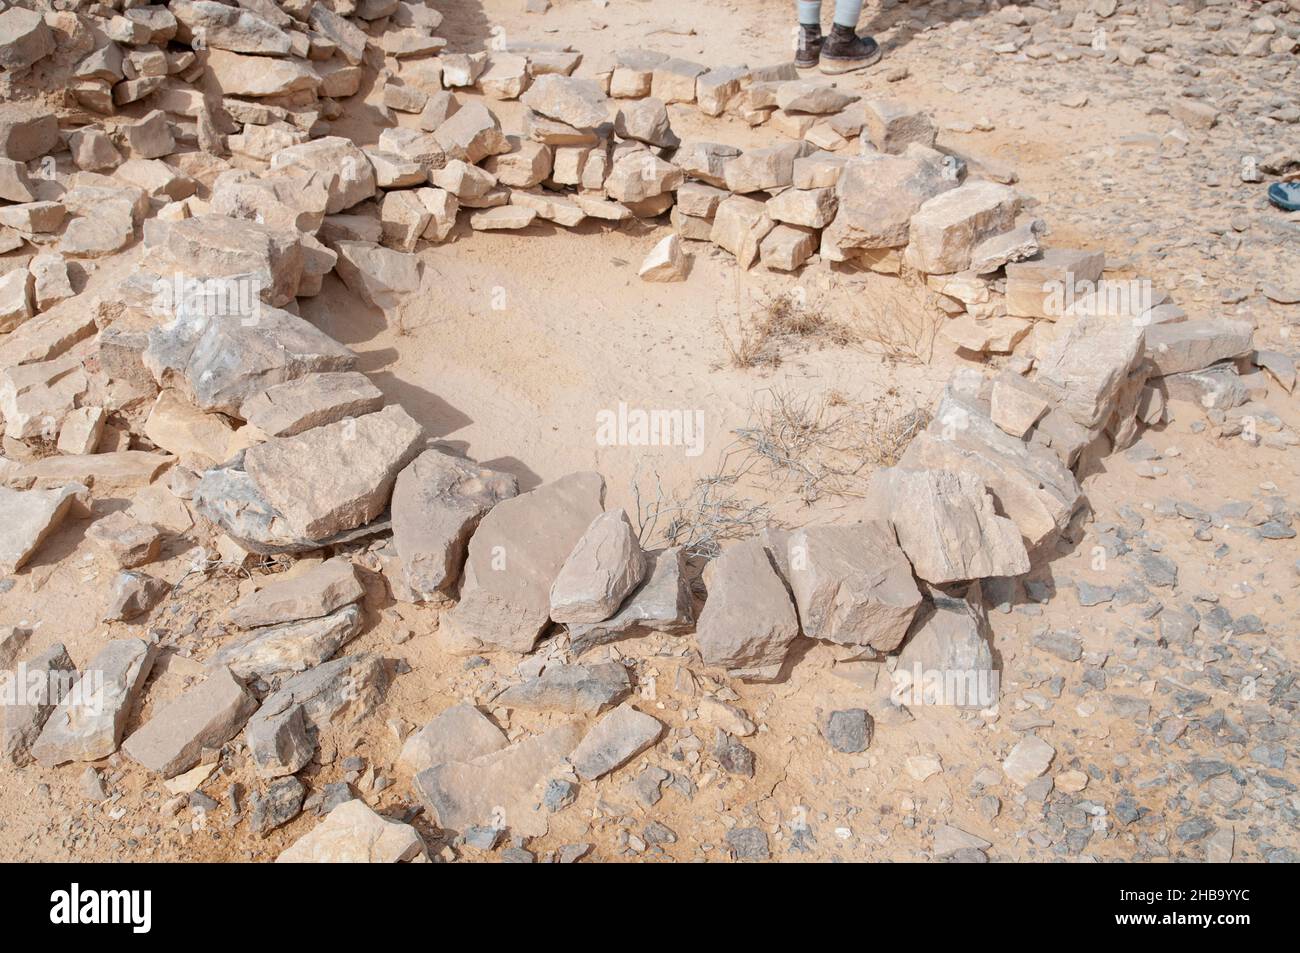 Prehistoric granary and threshing floor site in the Uvda Valley desert region, Negev, Israel. These sites have been dated to the Bronze age (6thâ€“3rd millennia BC). Stock Photo